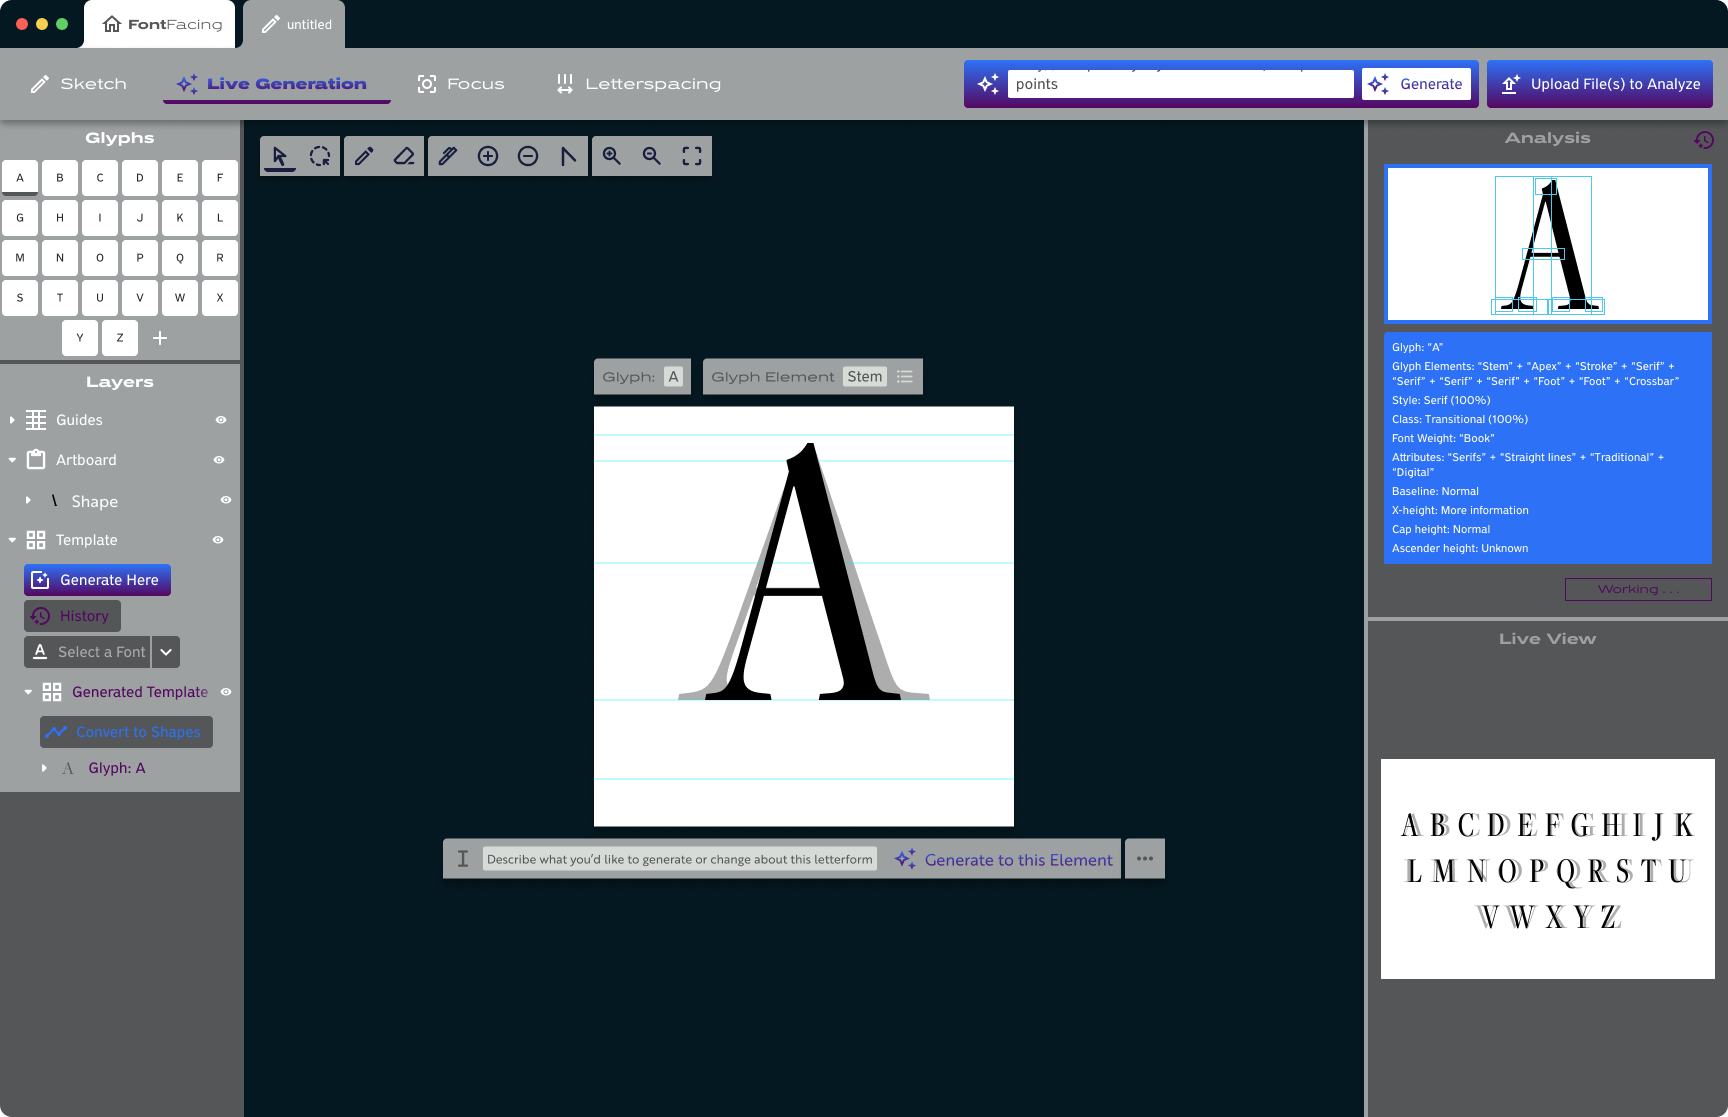 Mockup of a desktop application for the graphic design of typefaces, featuring an artboard where a letterform is being worked on and the toolbars and menu options available.